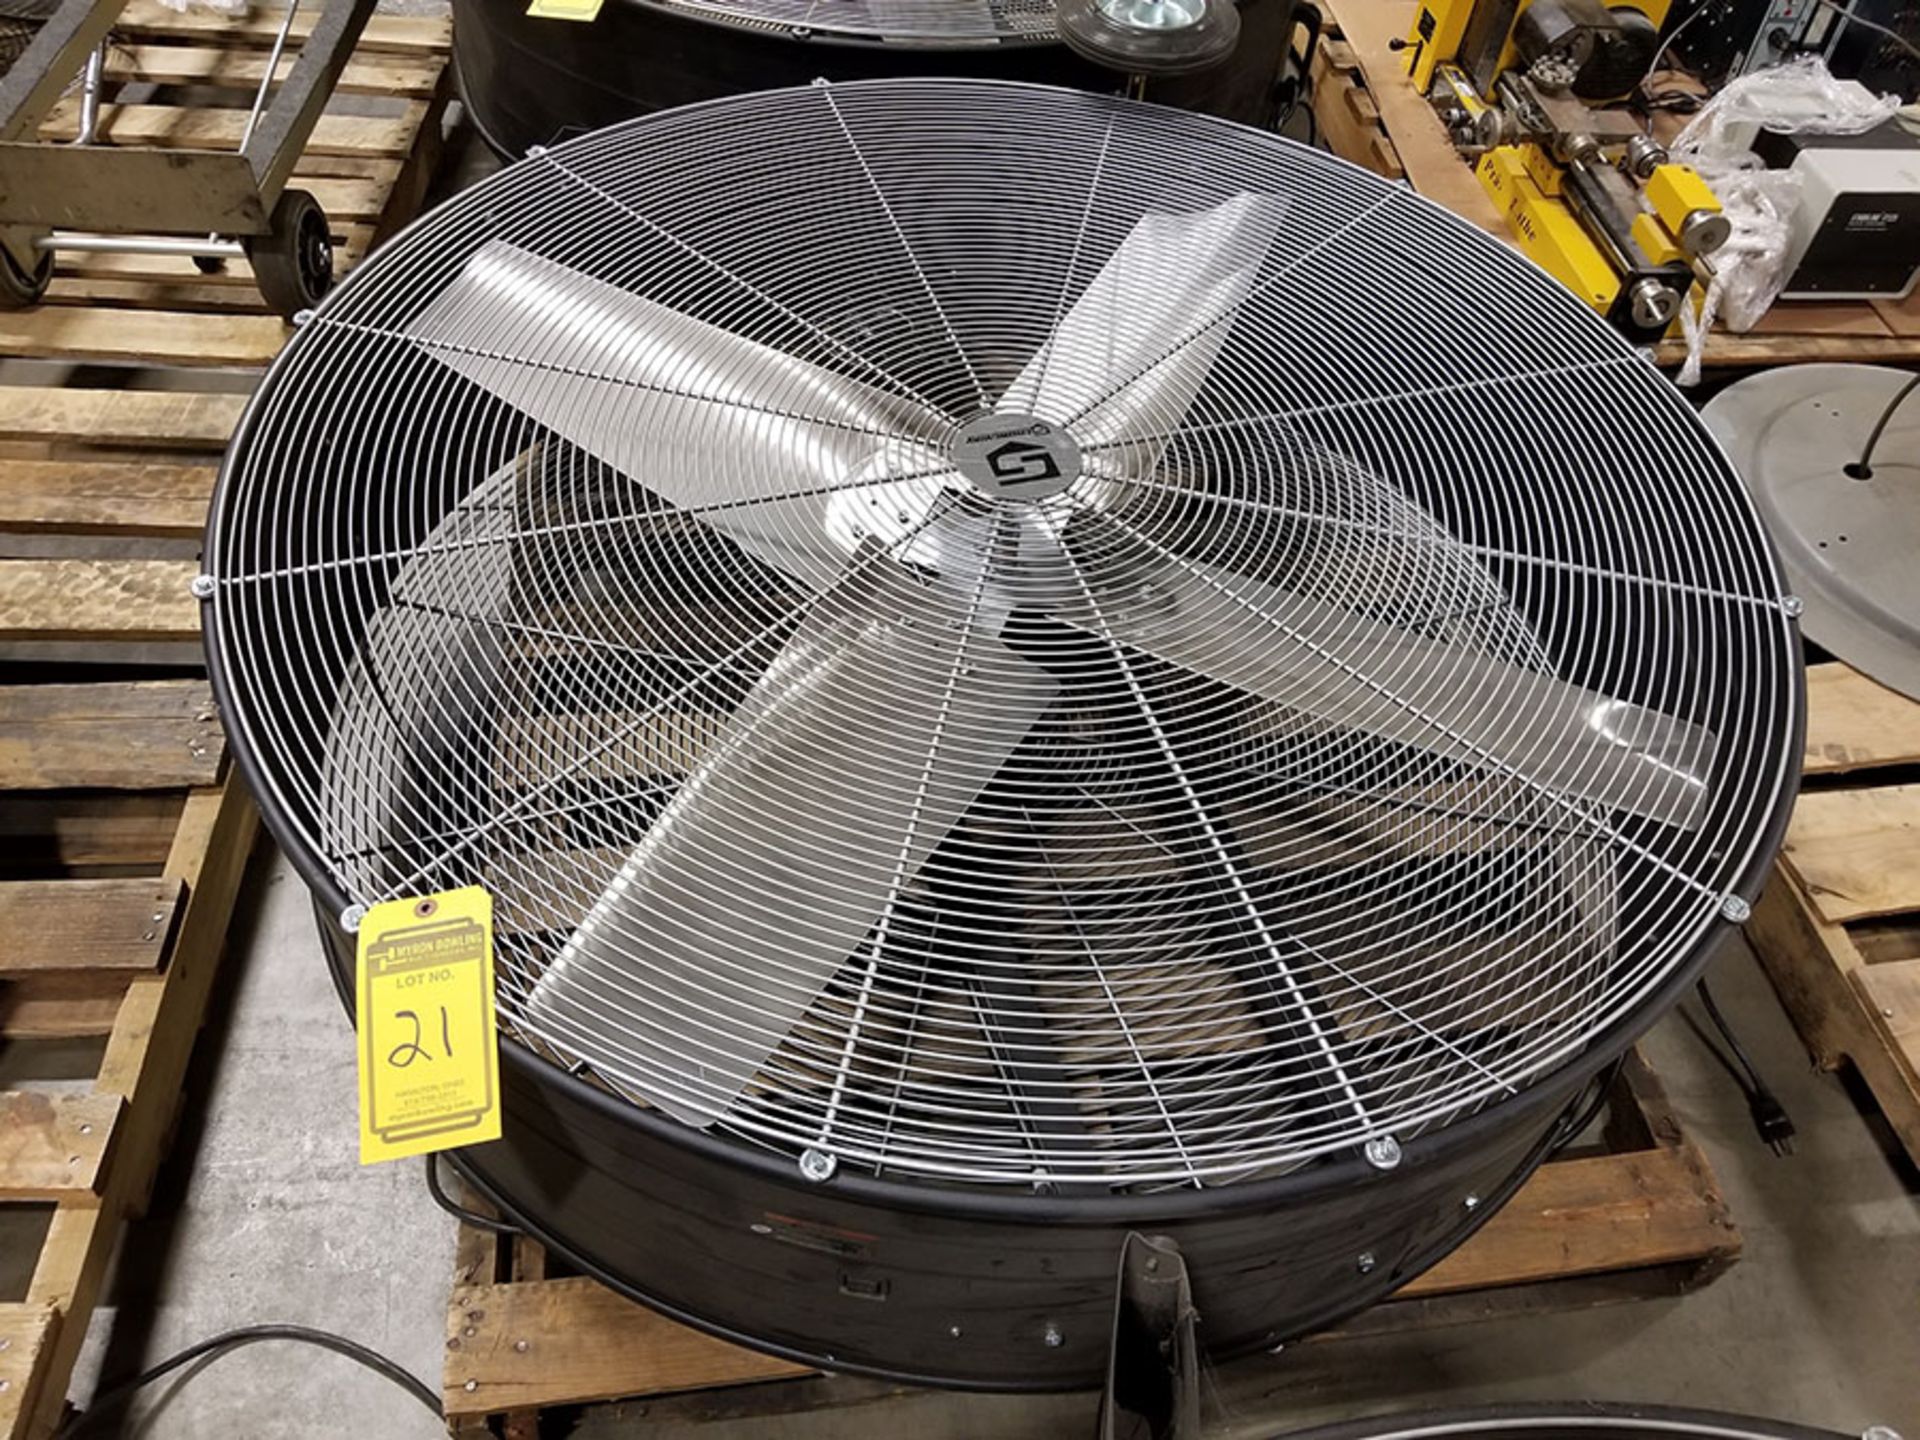 STRONGWAY 48’’ BELT DRIVE DRUM FANS, MODEL 49935, 120V, 60HZ, 9A, LO/HIGH SWITCH - Image 2 of 4